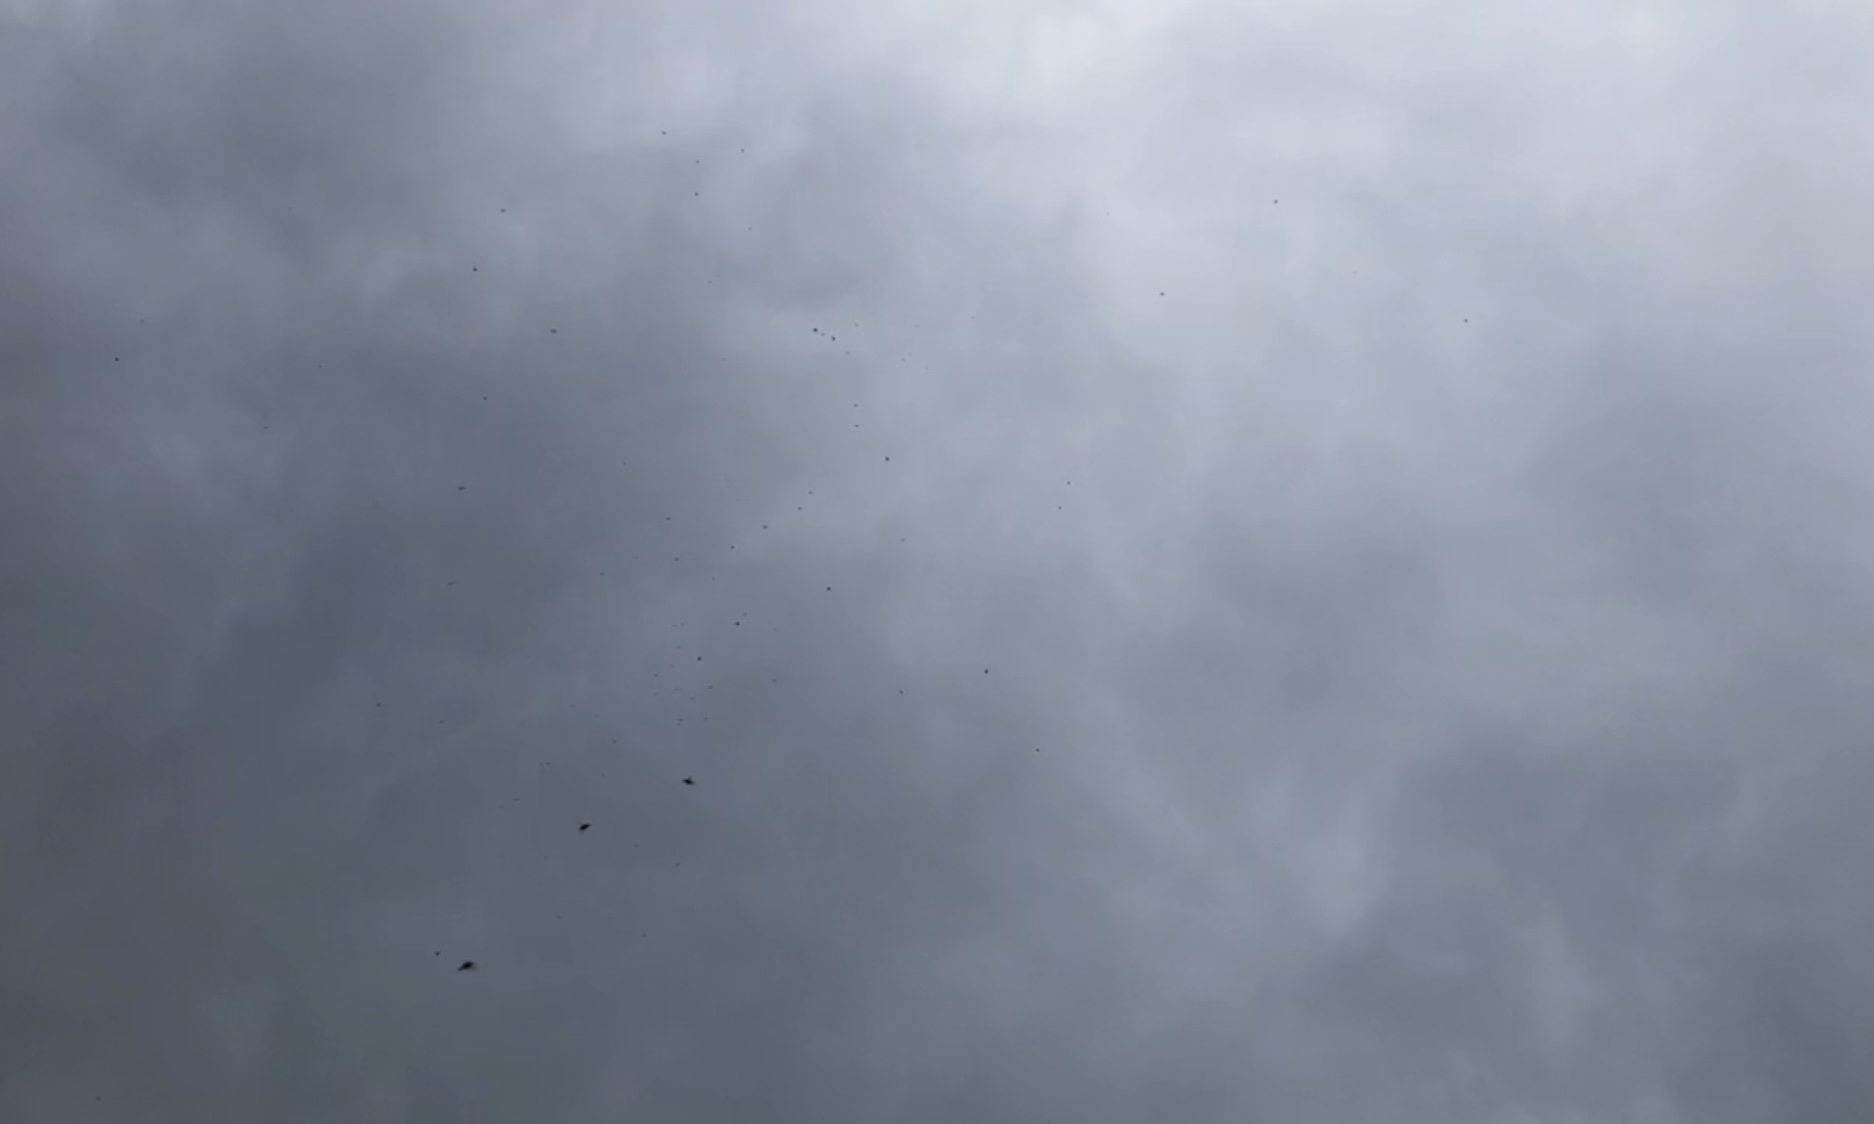 Looking up at the fly swarm, after I had laid down. In this view, generally darker grey clouds now overhead, over sixty flies are visible as little black dots, further and closer, above Kabutroid.